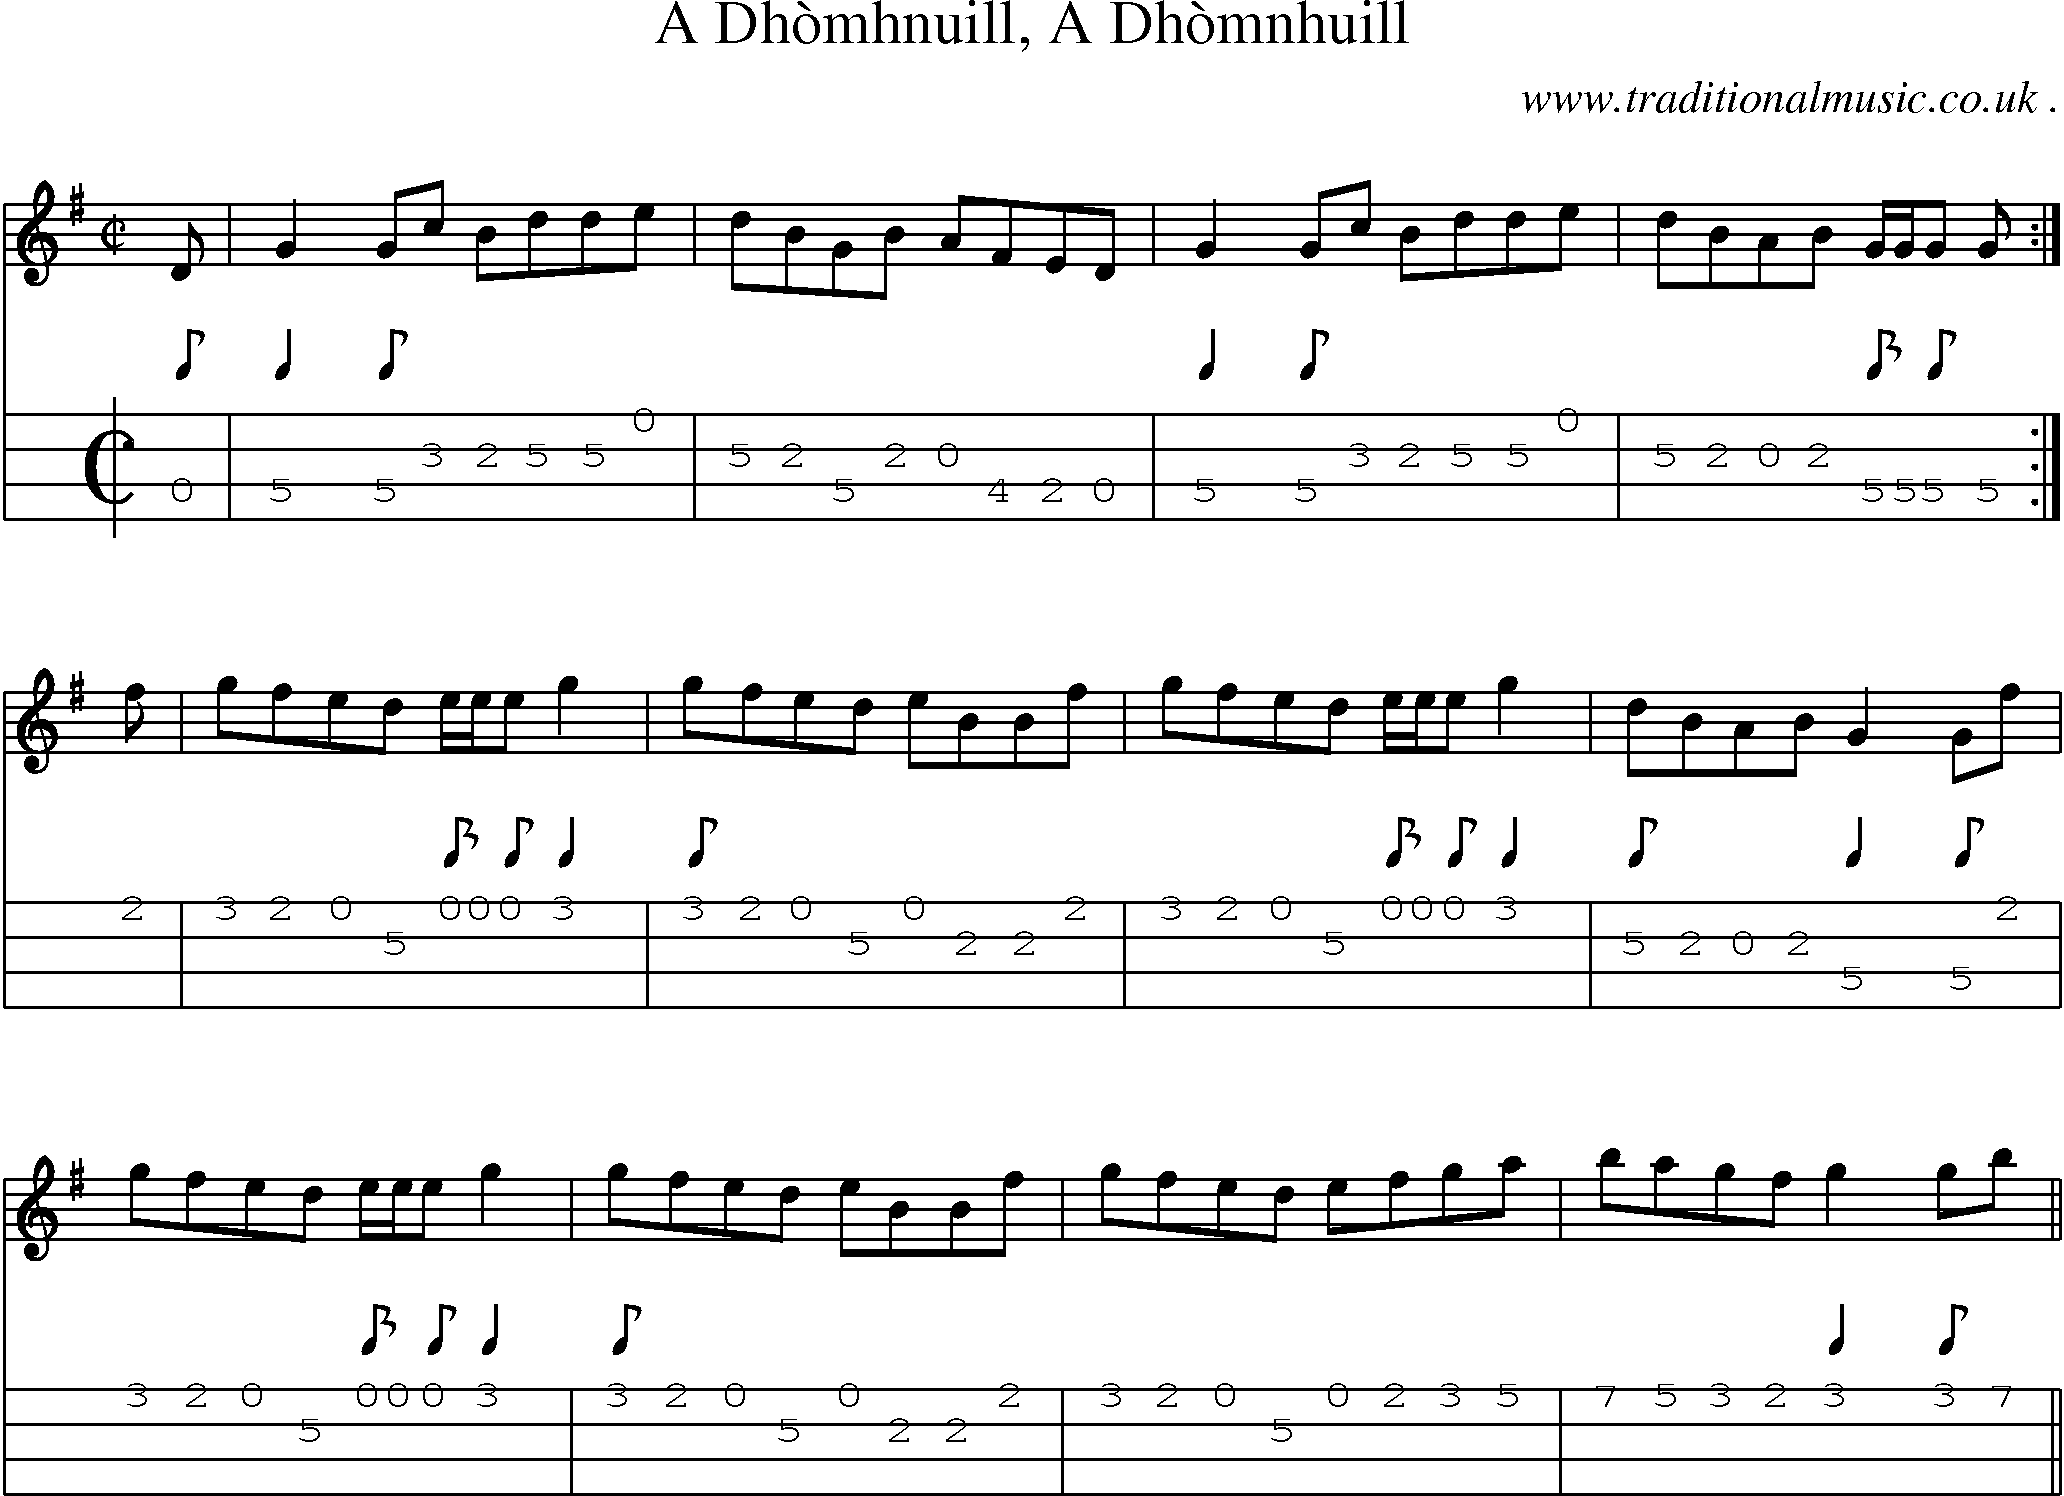 Sheet-music  score, Chords and Mandolin Tabs for A Dhomhnuill A Dhomnhuill